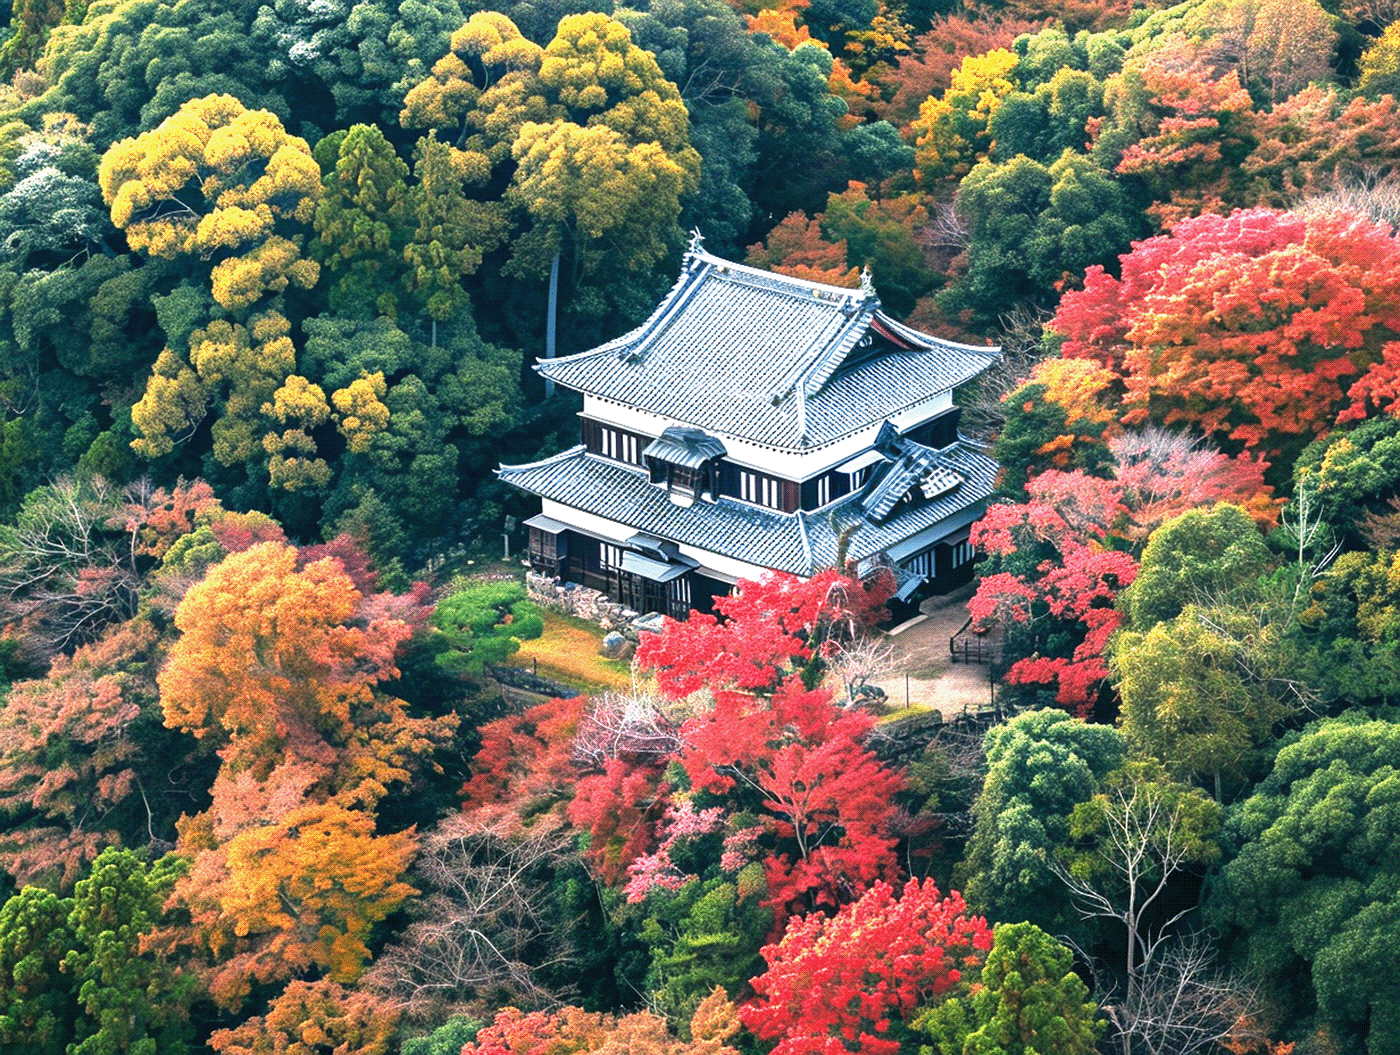 An old Japanese castle surrounded by a dense colorful forest